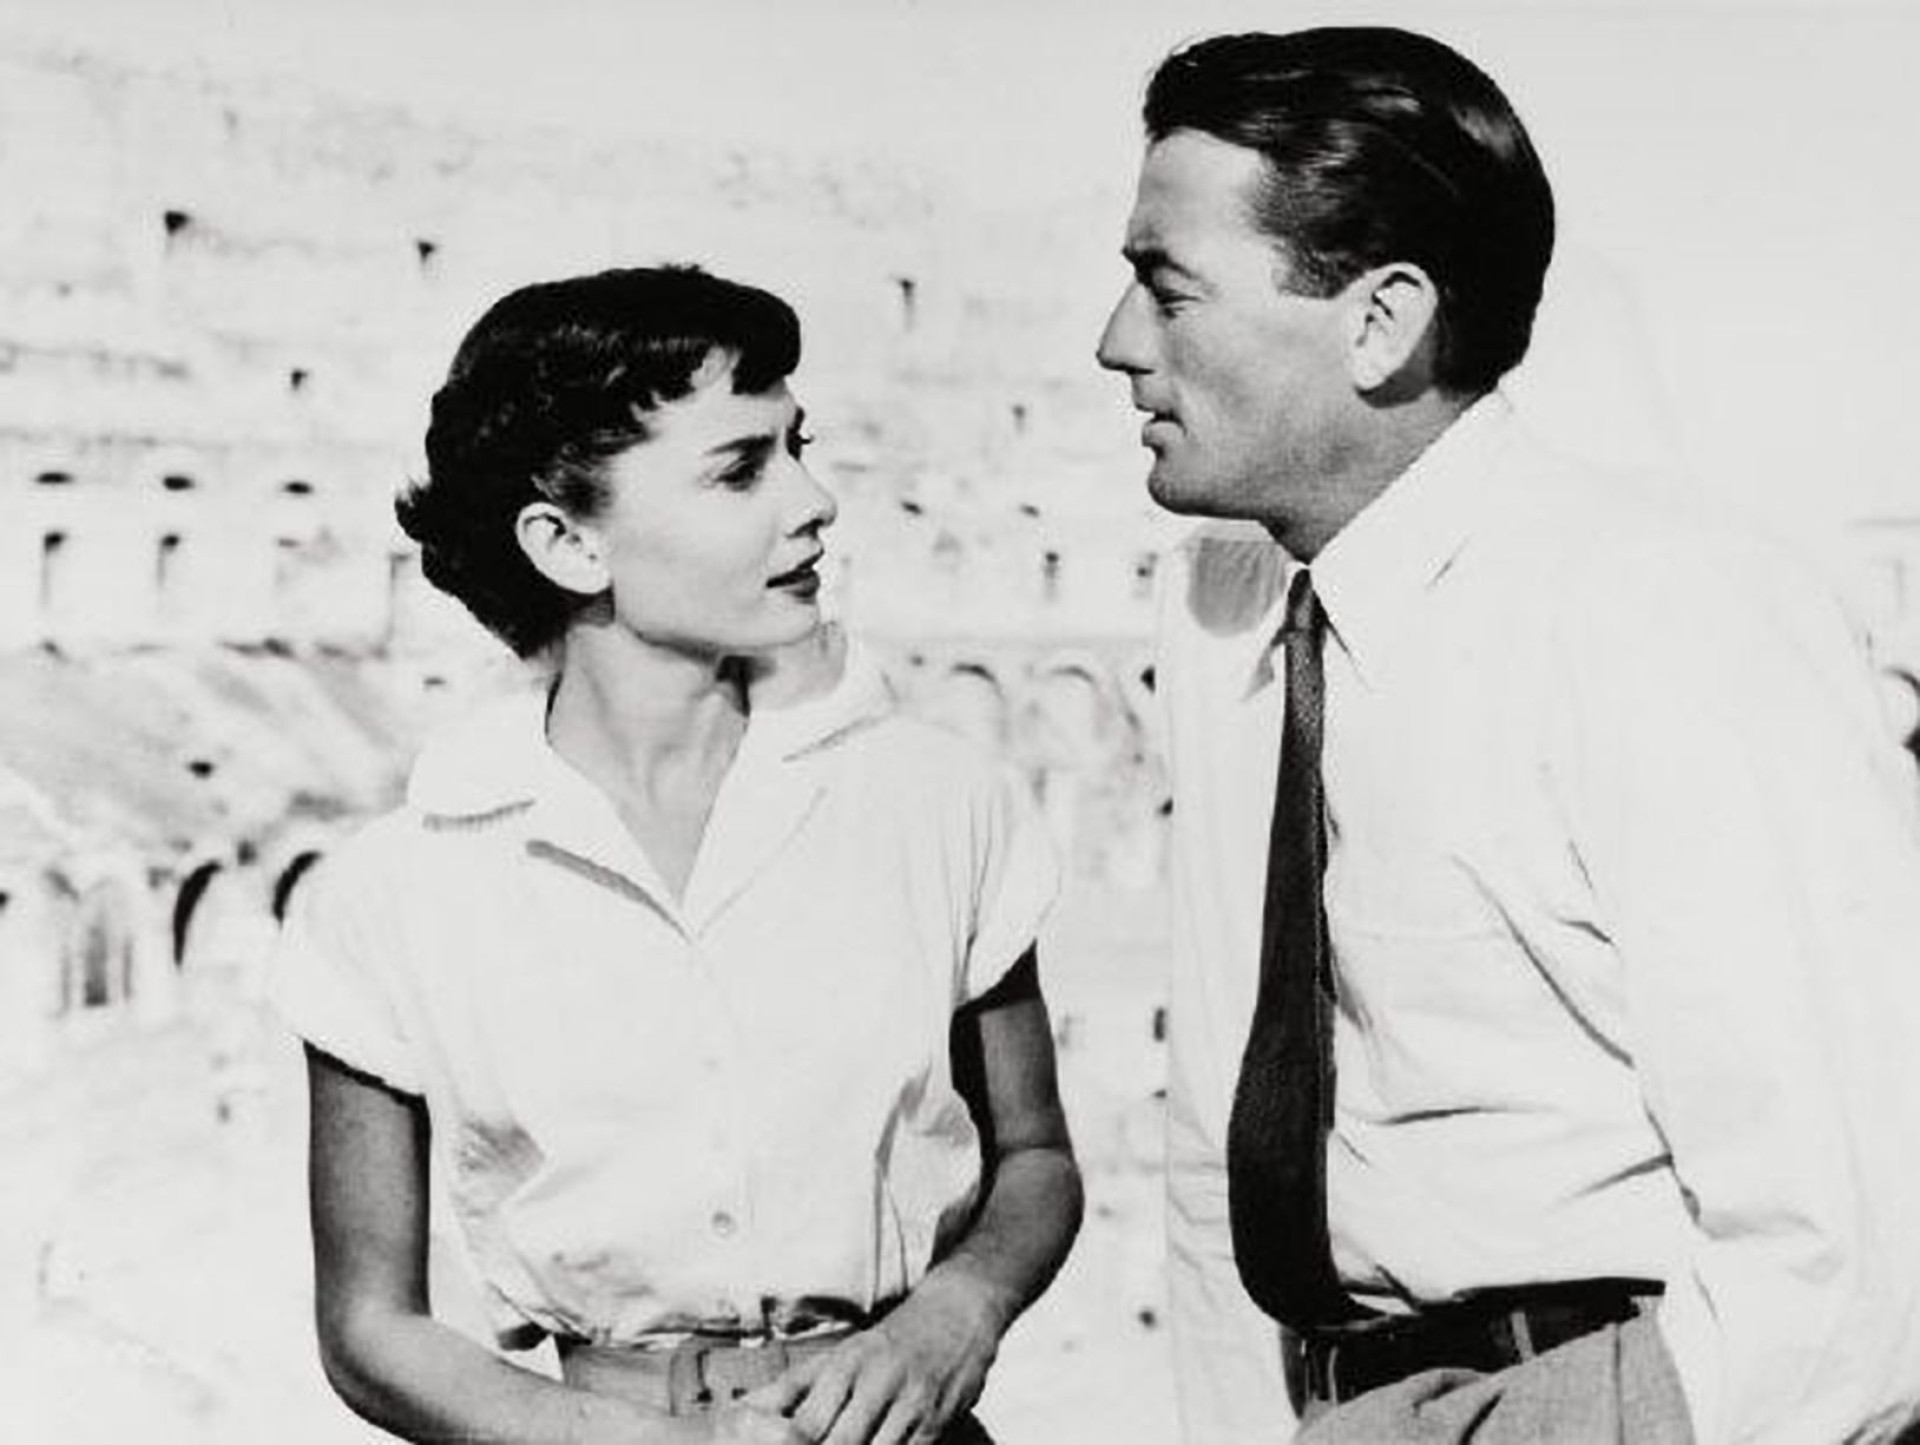 Romance, royalty, and the gorgeous setting of Rome perfectly complement Audrey Hepburn's debut role.<p>You may also like:<a href="https://www.starsinsider.com/n/445635?utm_source=msn.com&utm_medium=display&utm_campaign=referral_description&utm_content=356239v4en-us"> Famous actors reveal their most embarrassing moments on set</a></p>